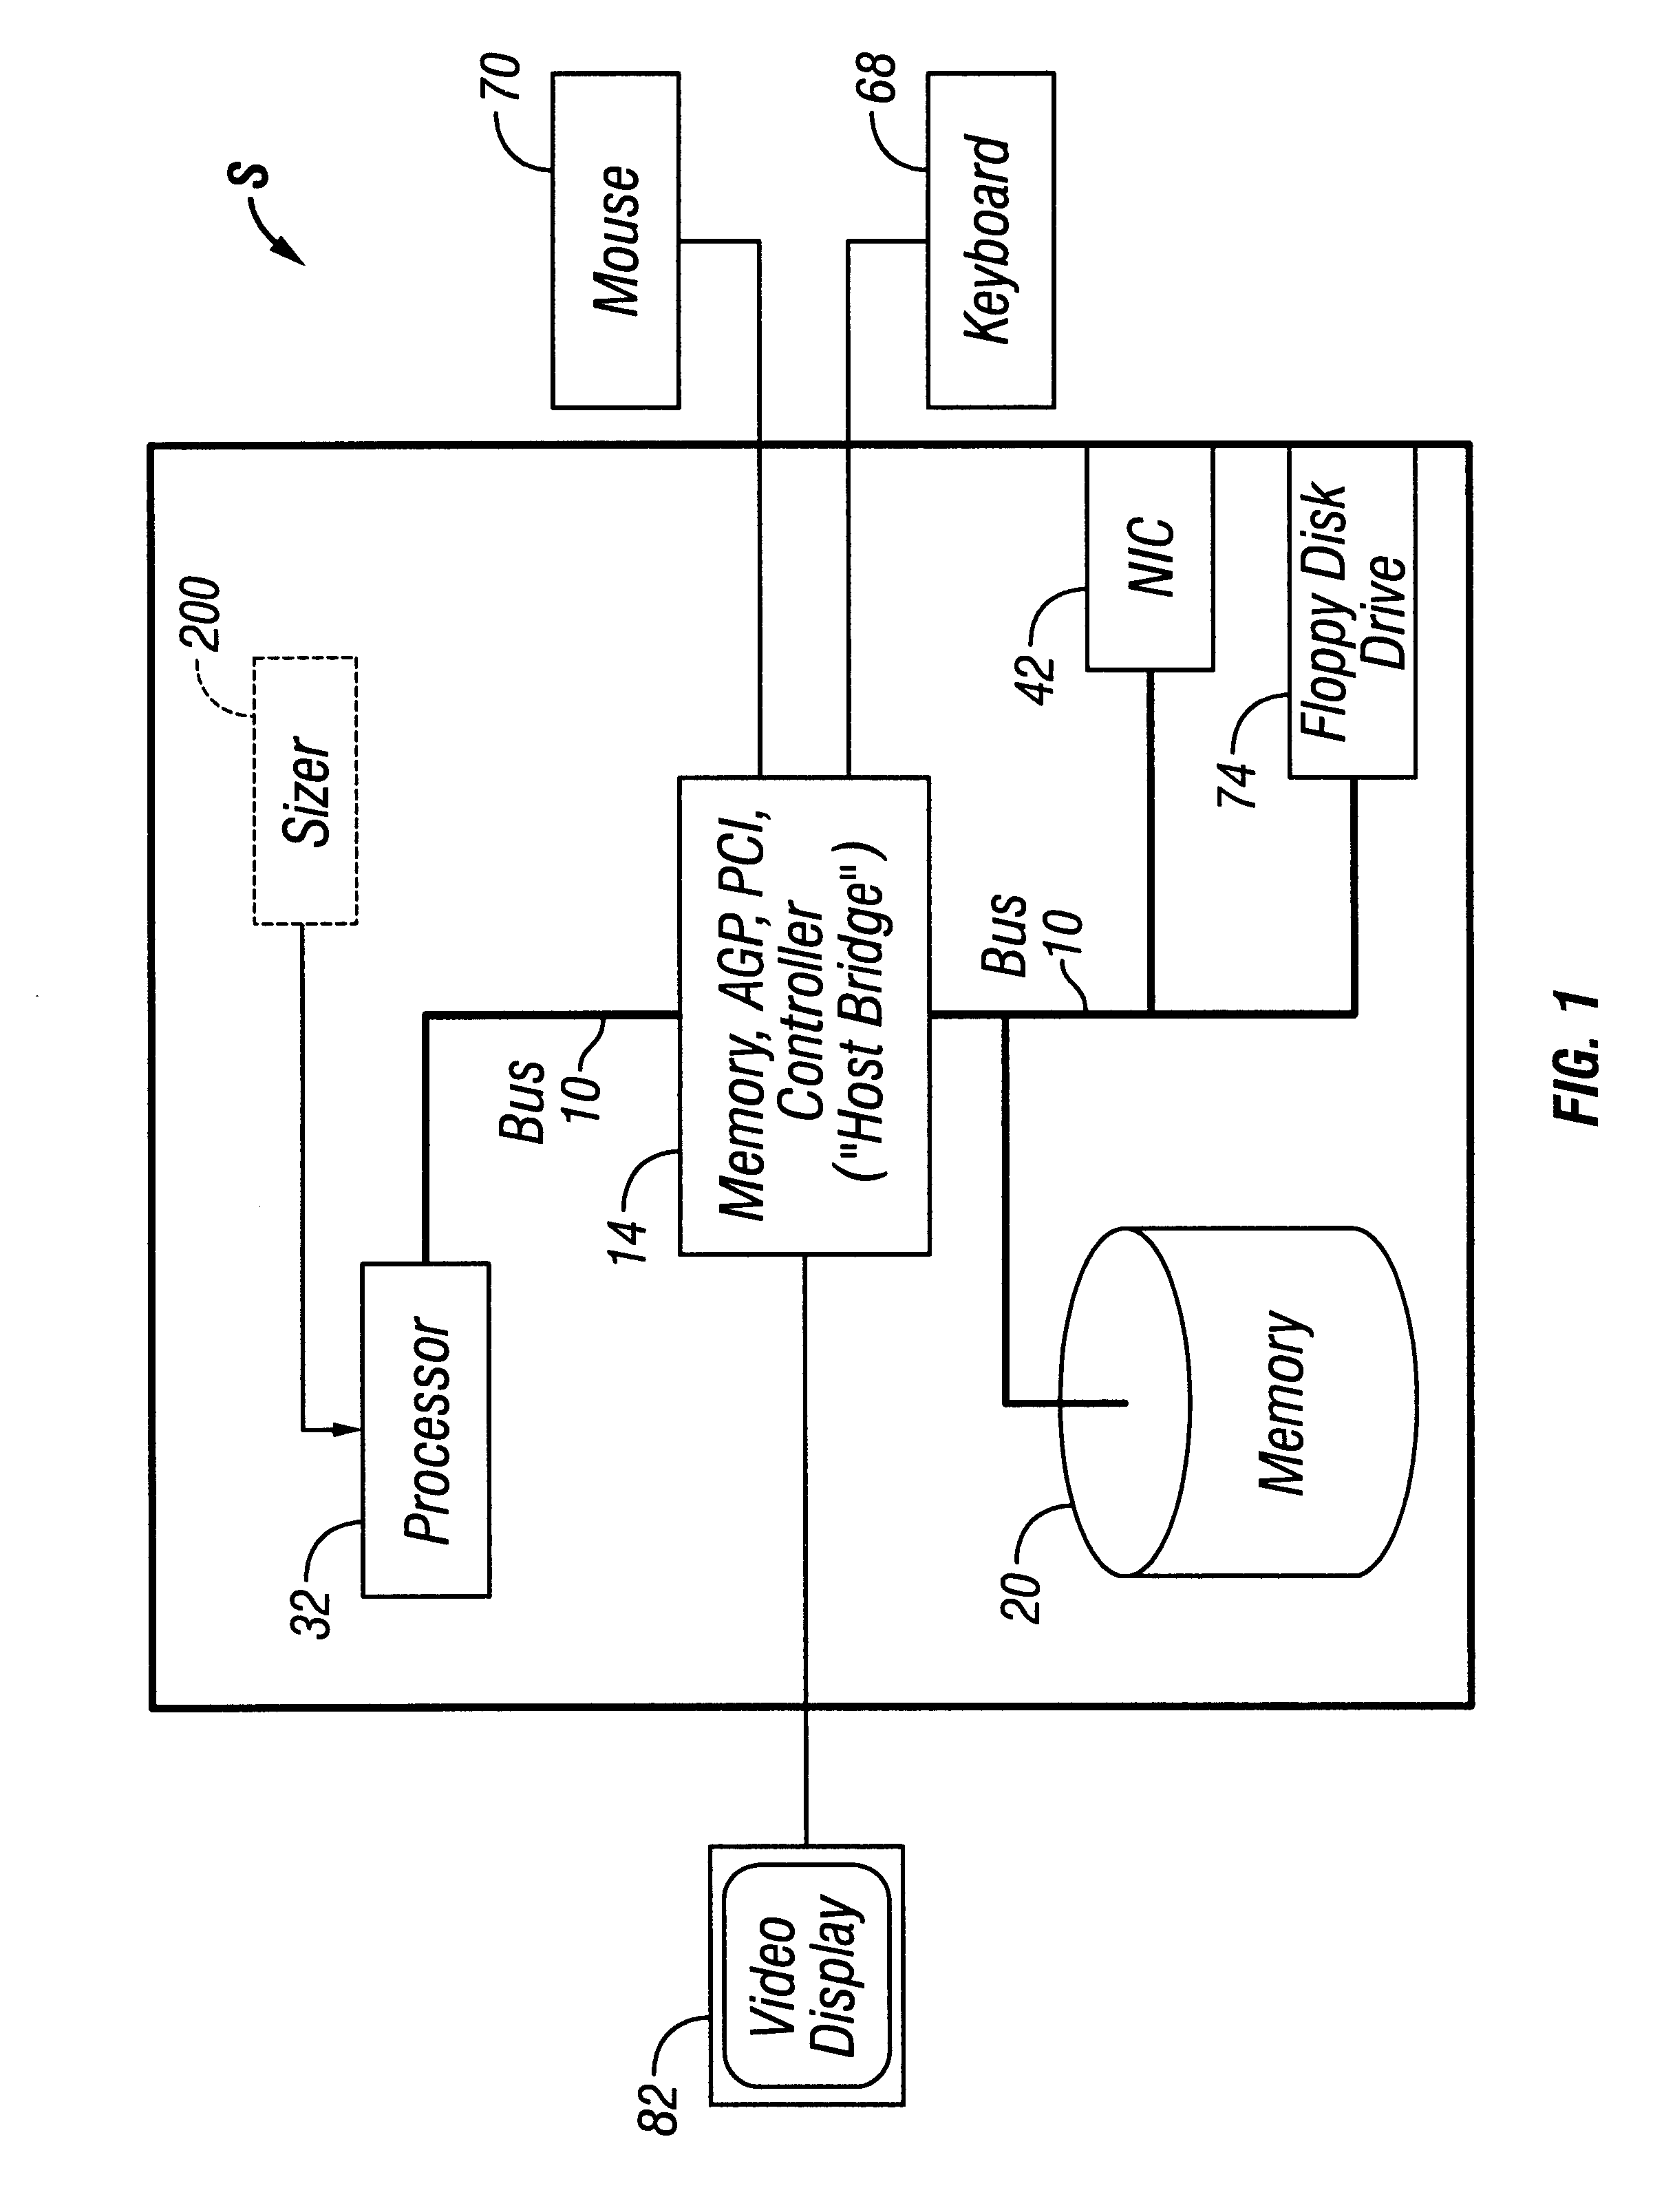 System for describing and storing descriptions of hierachical structures using hardware definition files to specify performance, characteristics, part number and name of hardware components